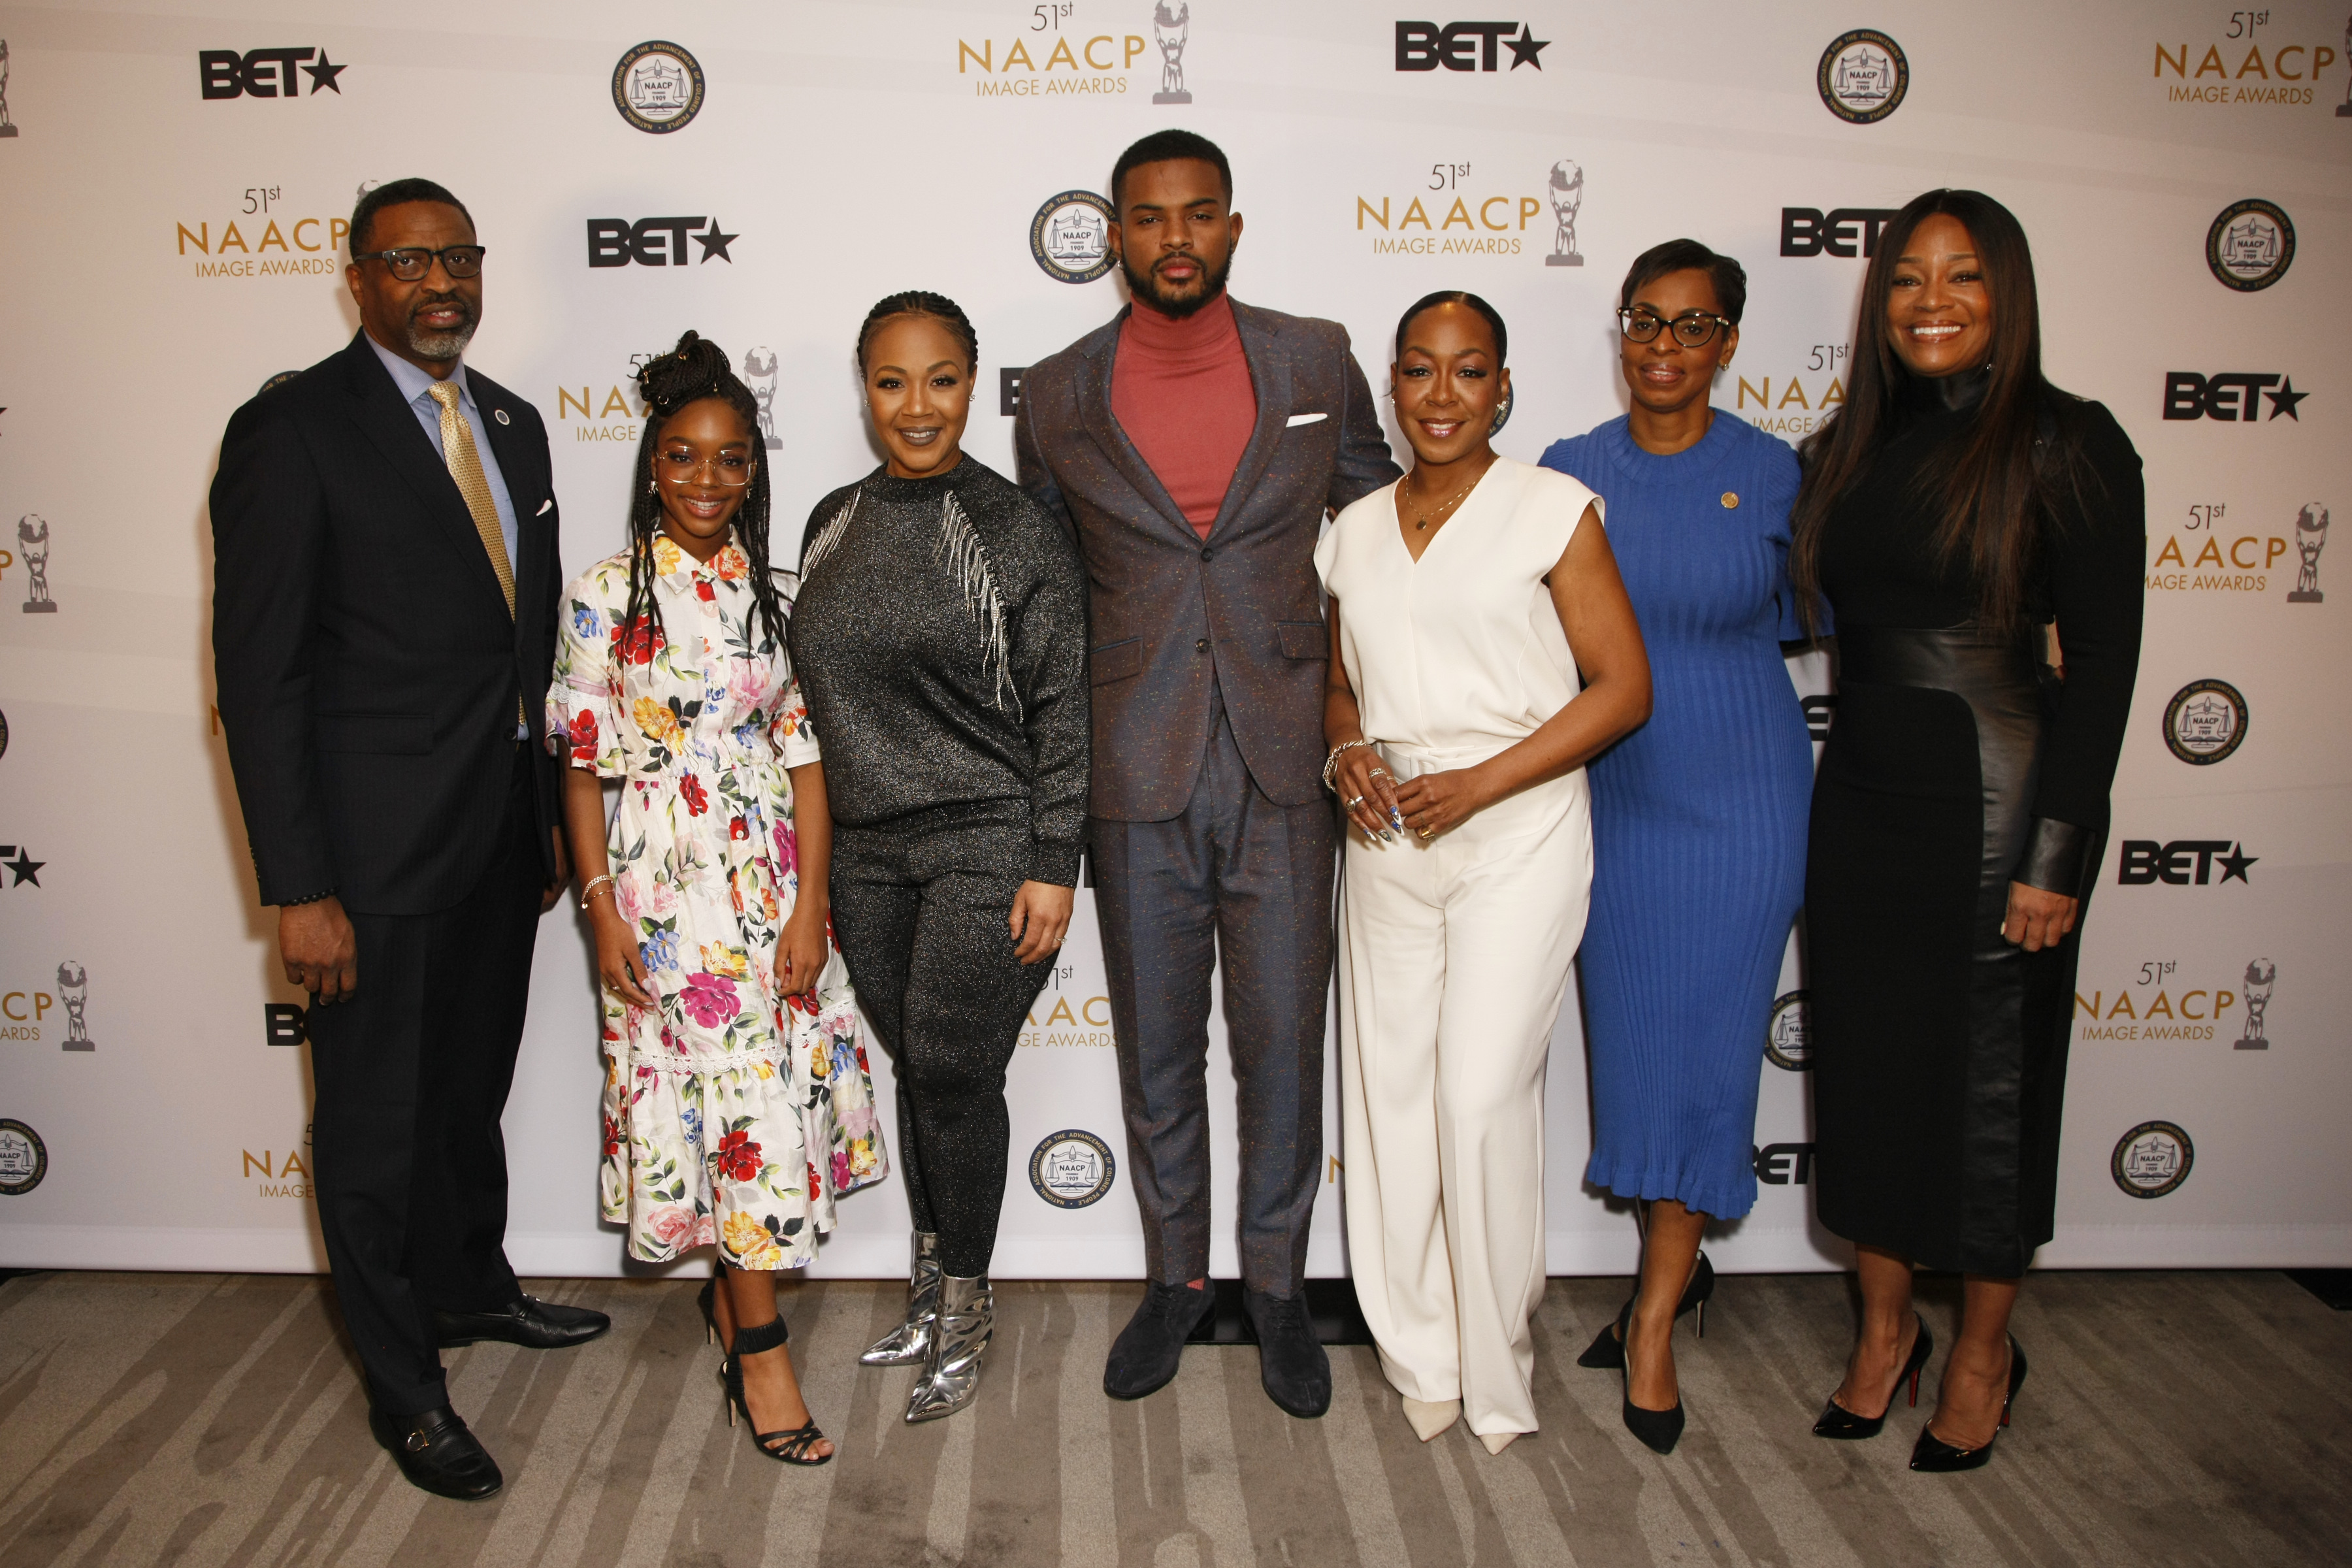 51st NAACP Image Awards Nomination Announcement